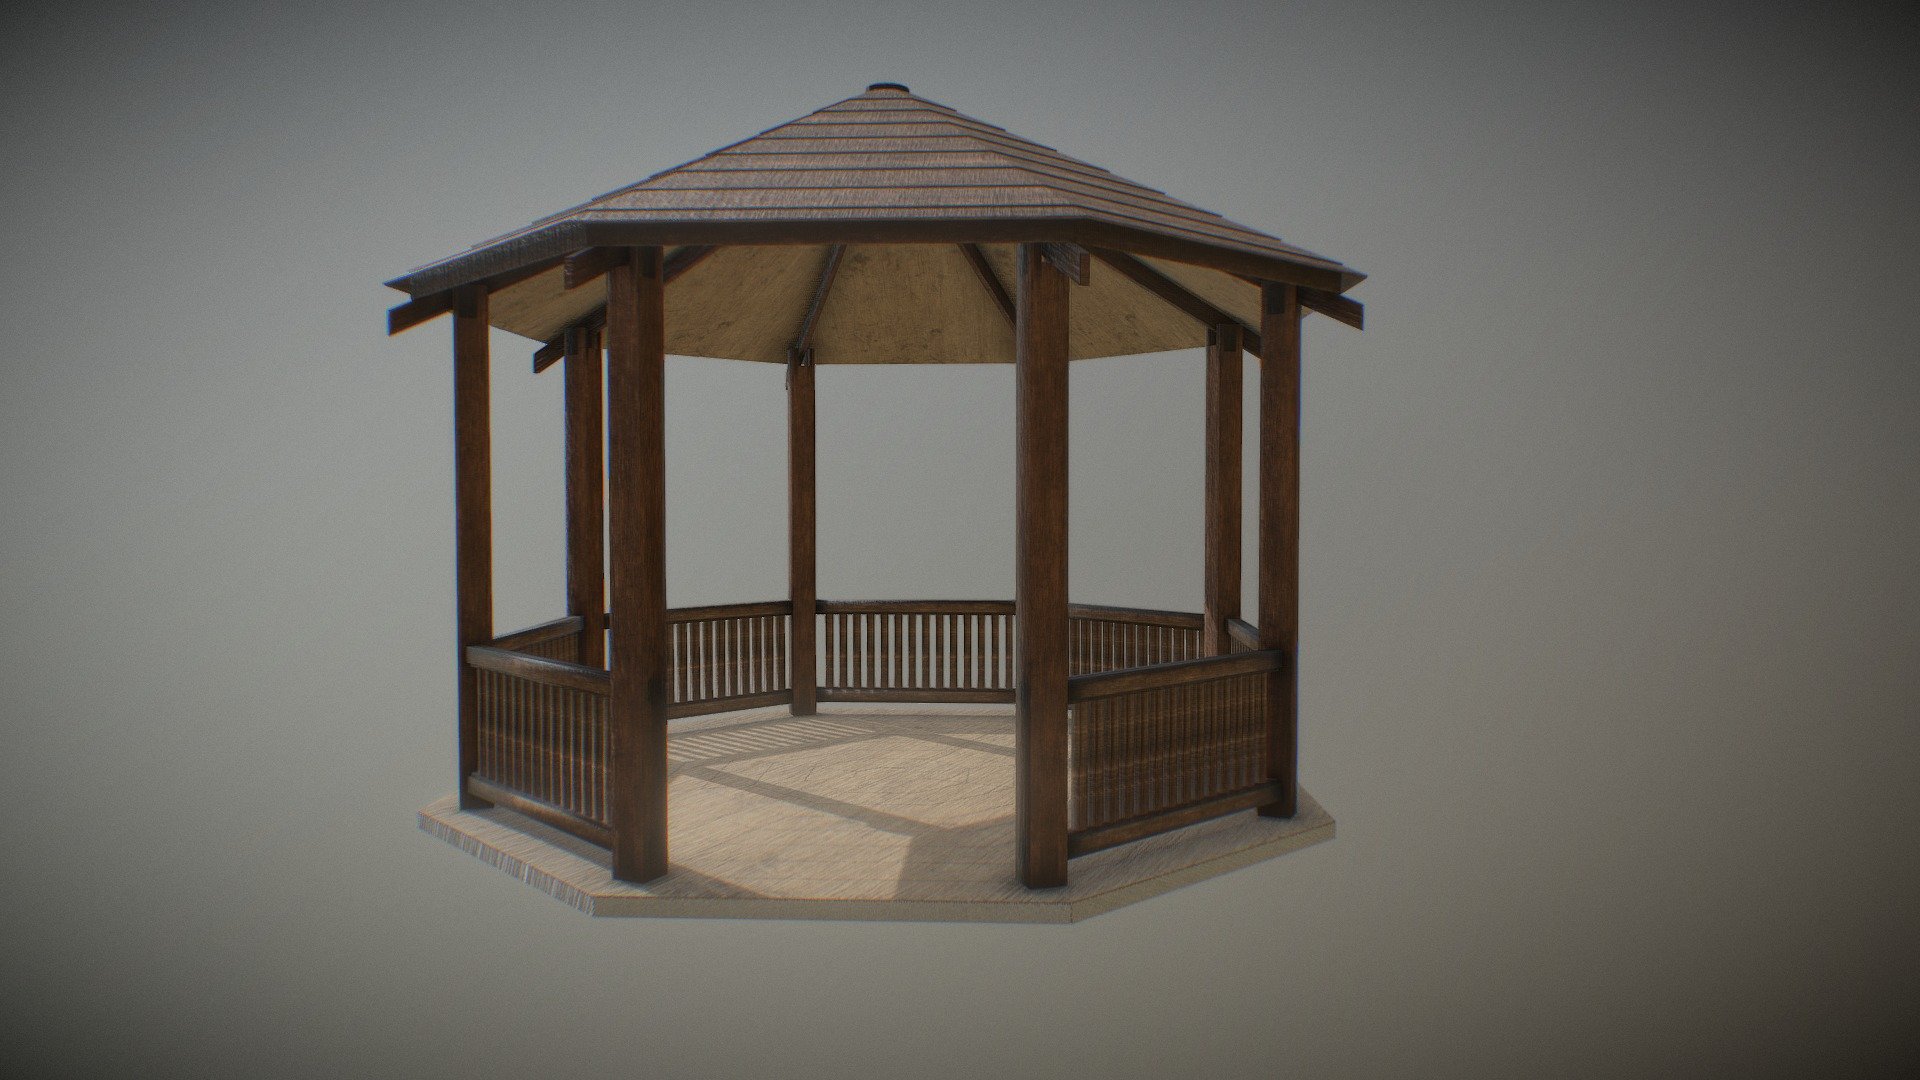 A simple Gazebo created for users of Sinespace virtul world. Feel free to use it in any project. Feel free to credit or not I don't really mind. This was made in unity using Pro-builder3D within unity3D. If you need the unity package for learnign purpose let me know. Hope you like enjoy! 3d model